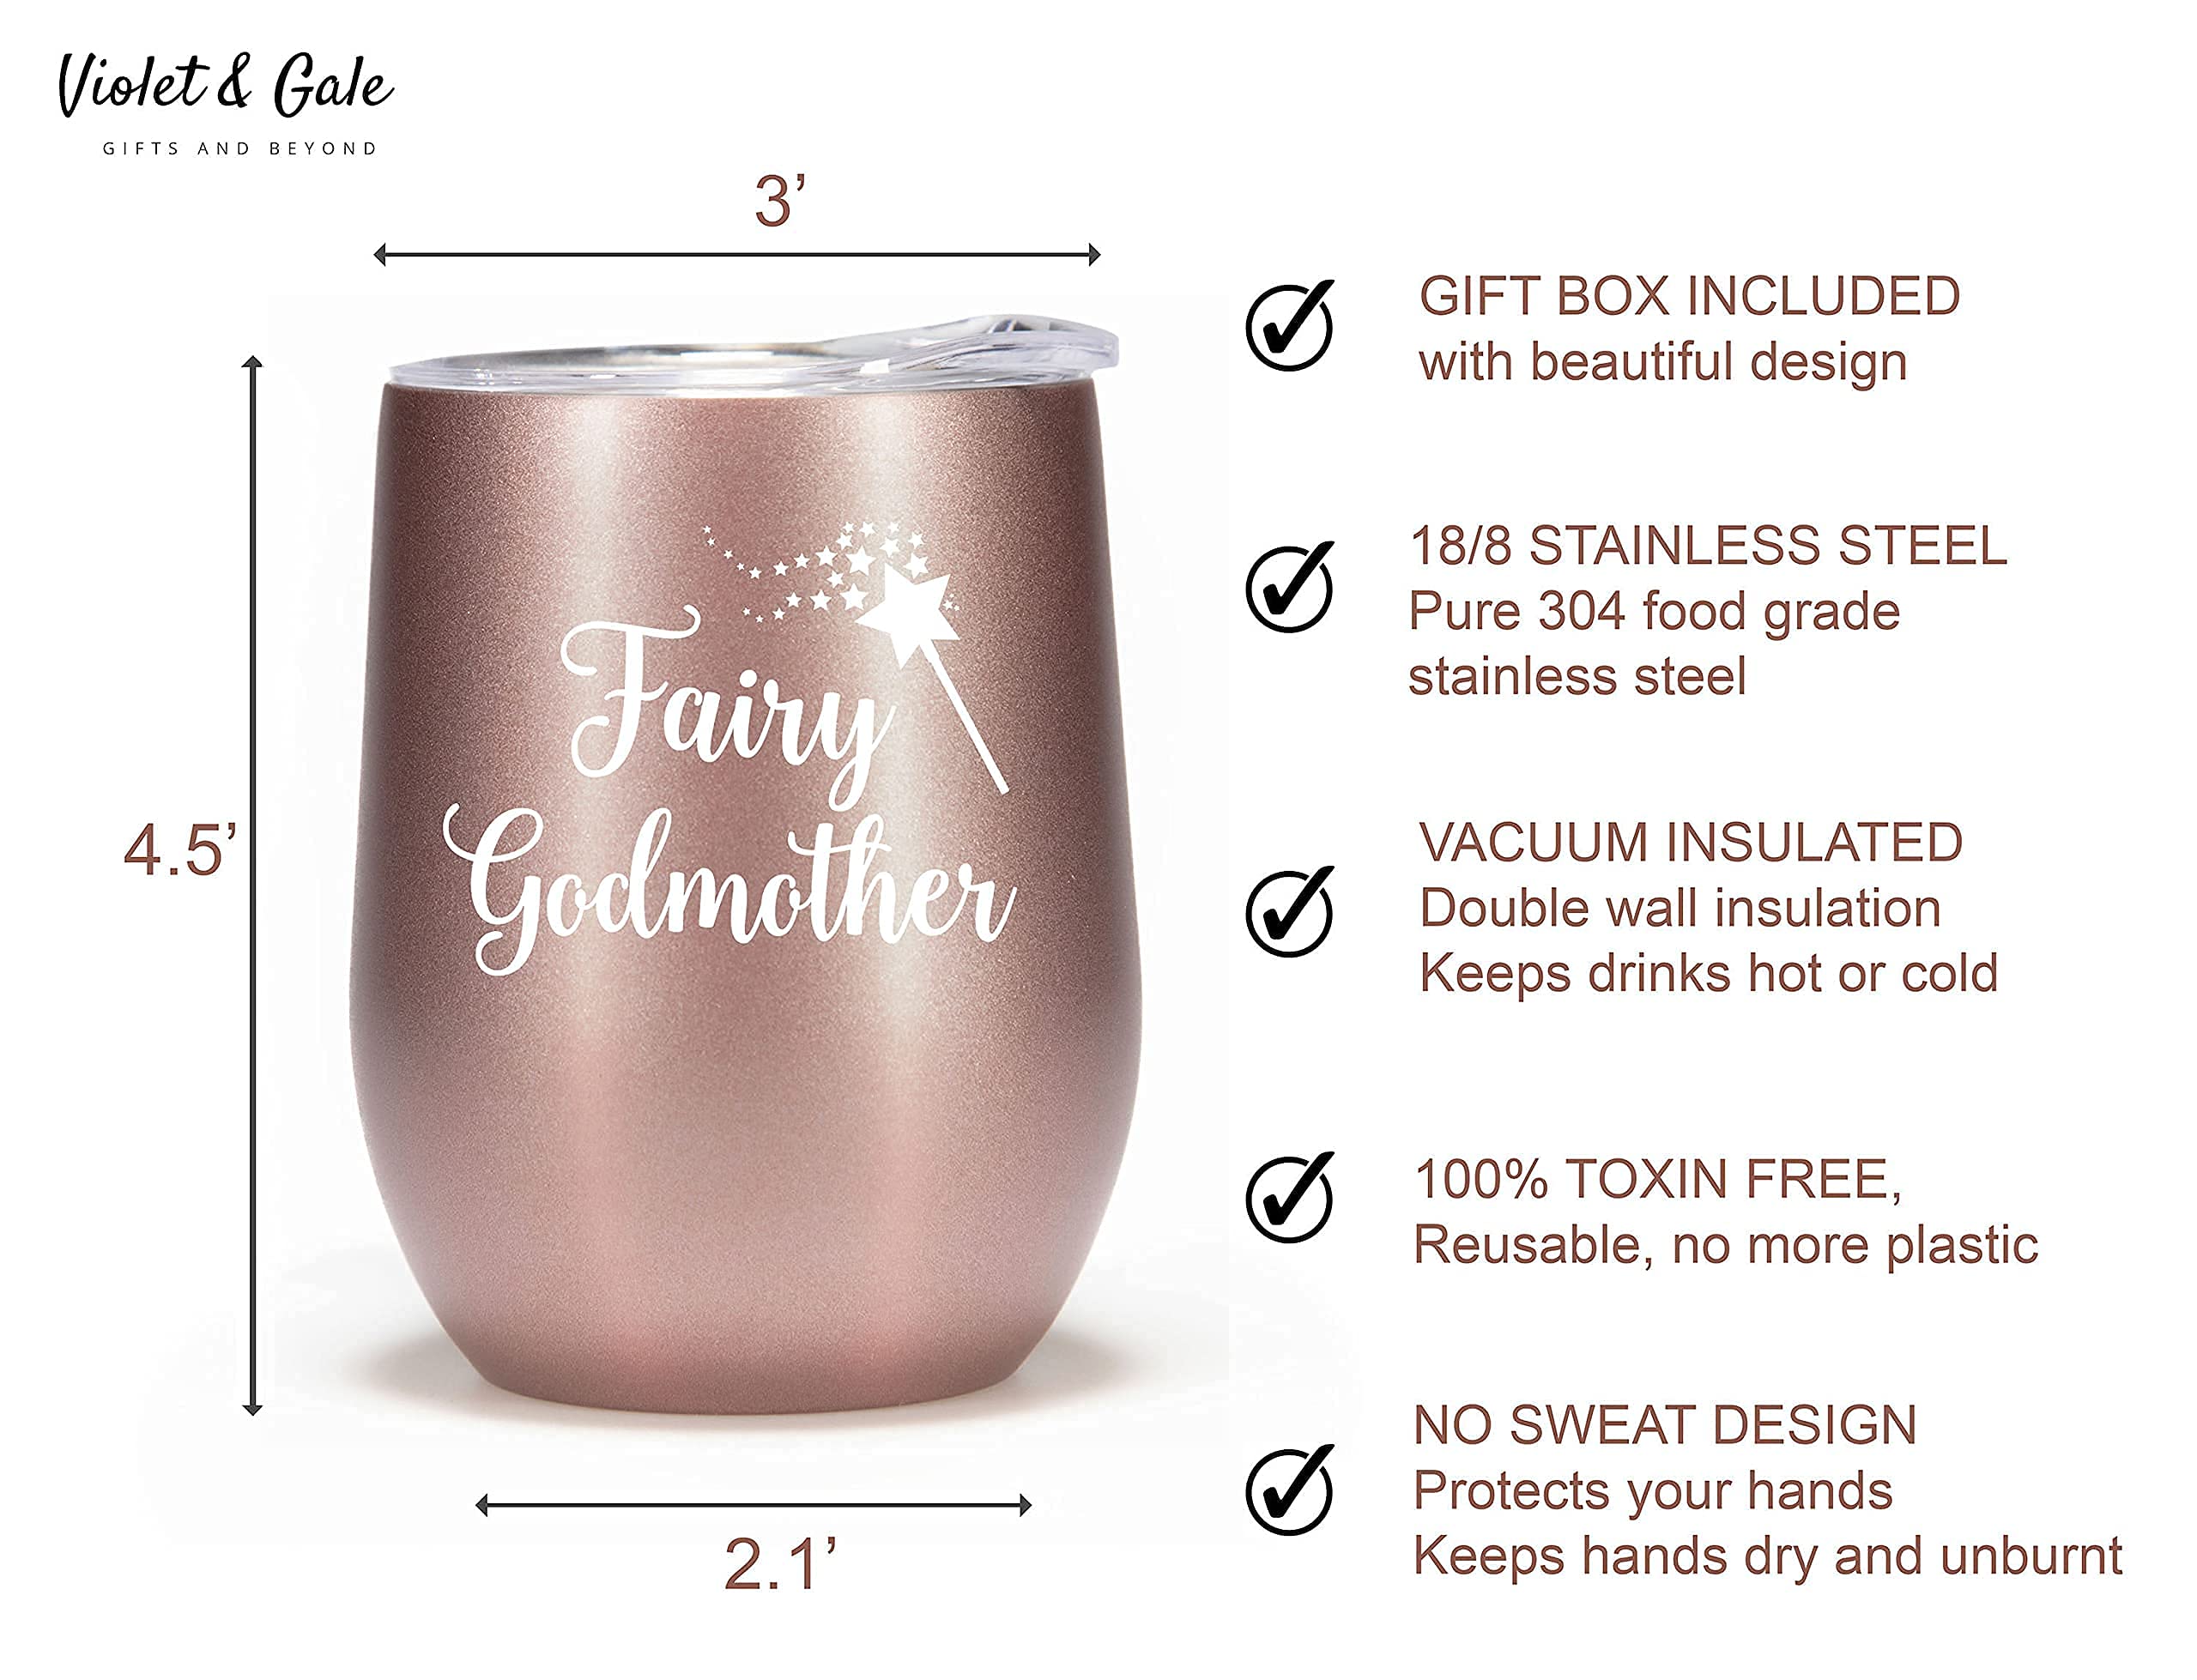 Violet & Gale Fairy Godmother Gifts for Women - Godmother Proposal Tumbler Cup Wine Glass 12oz - Beautiful Godmother Gifts from Godchild Coffee Mug Godparents Announcement Gift